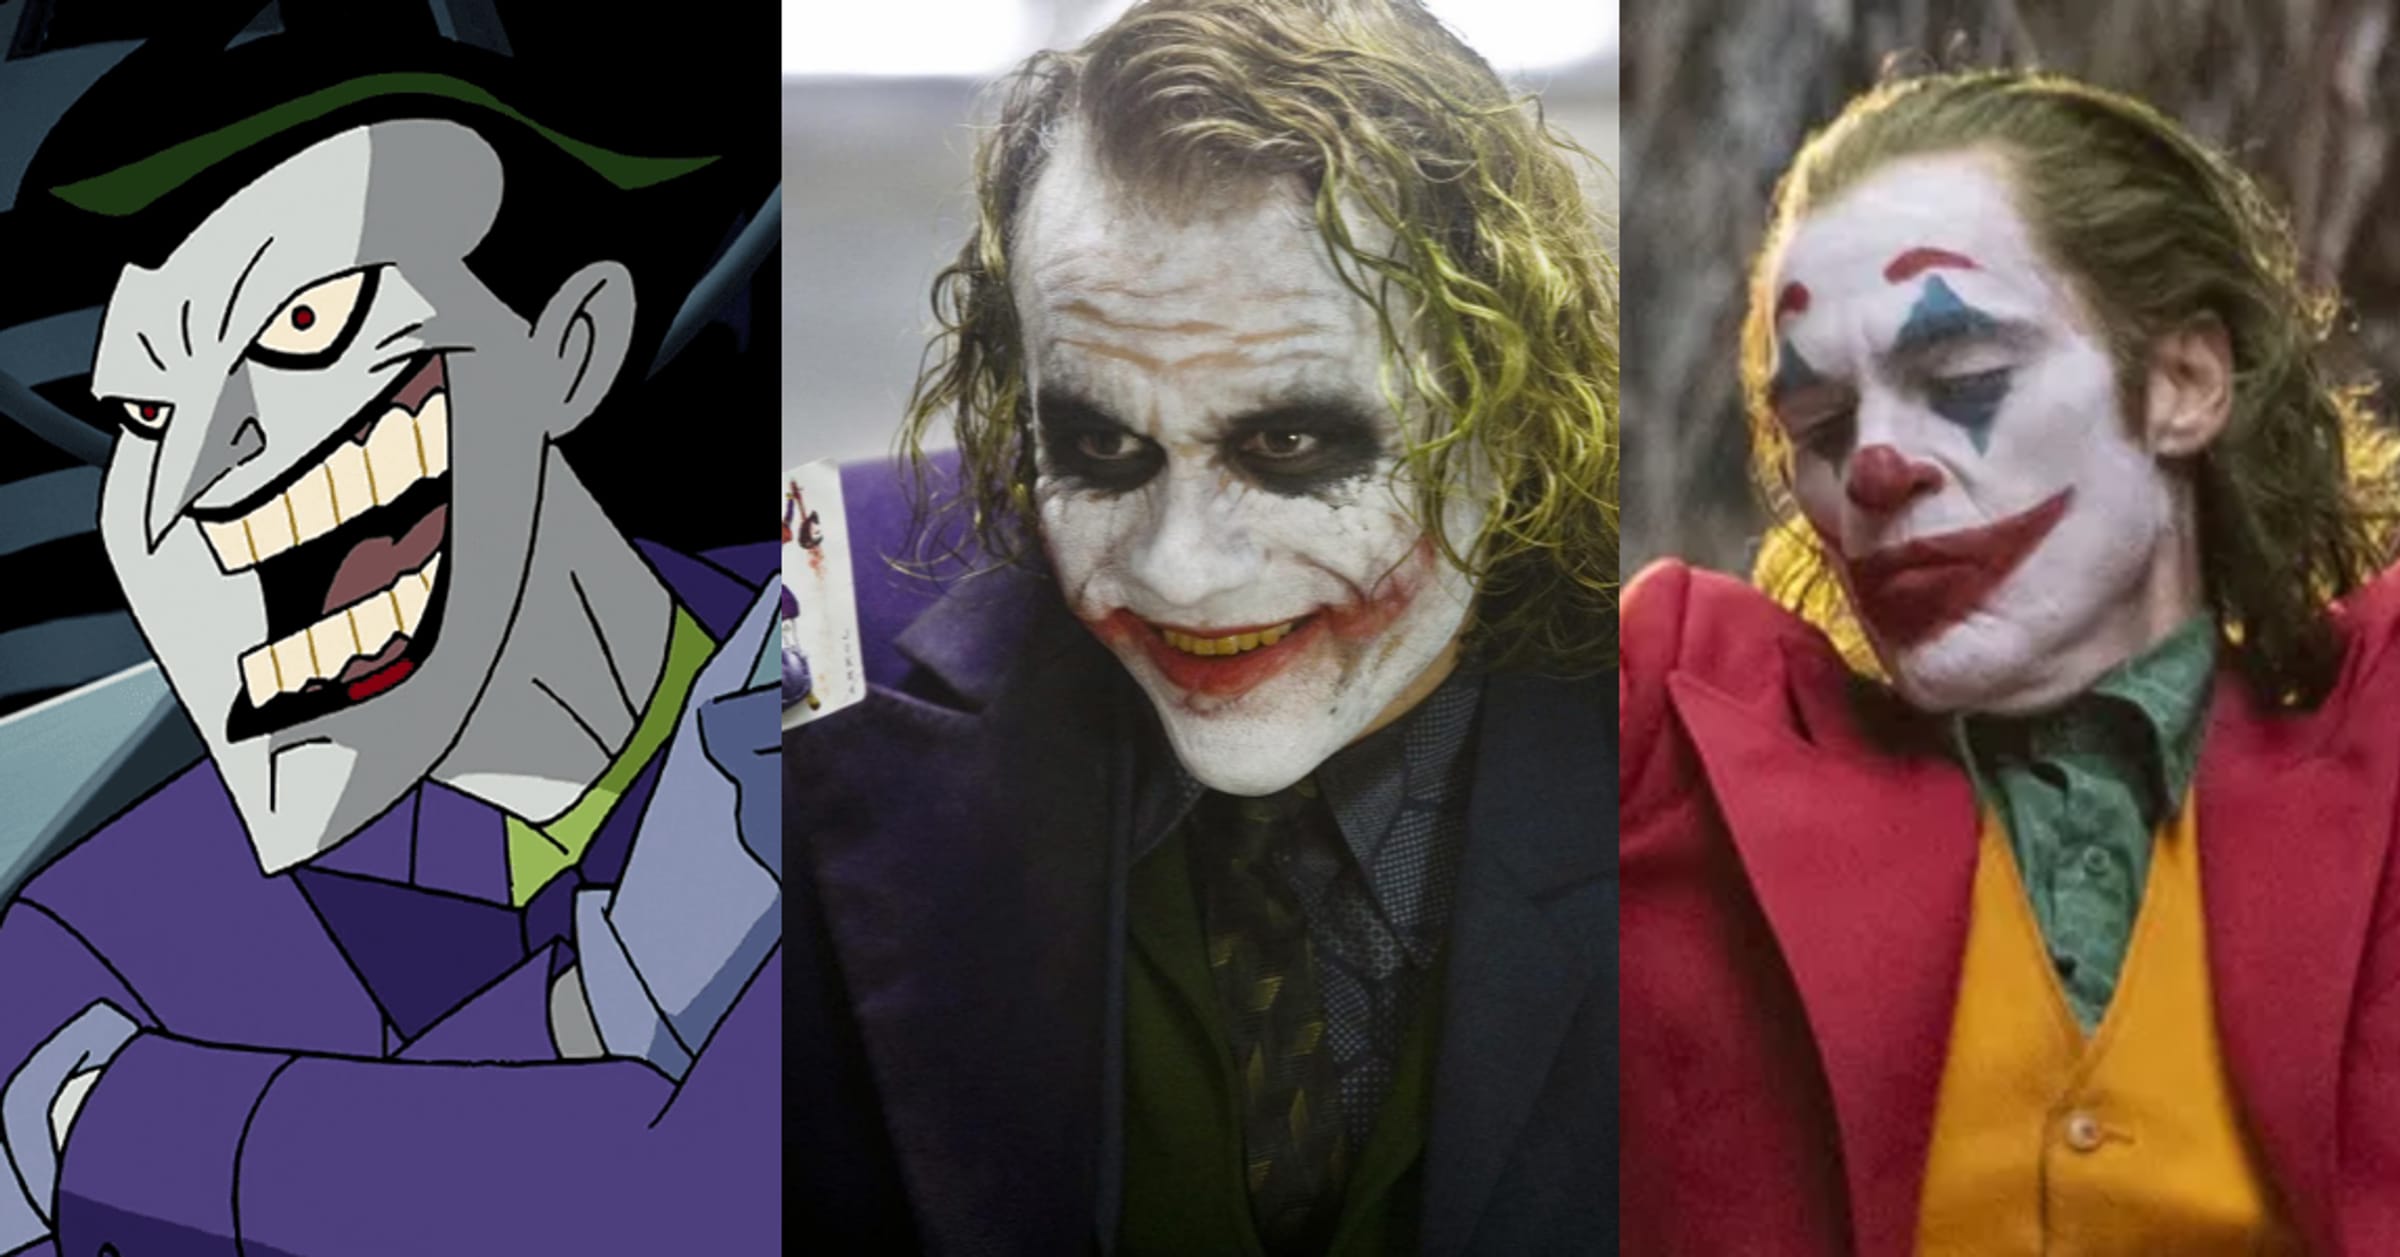 All 20+ Actors Who Have Played Joker, Ranked Best to Worst By Fans